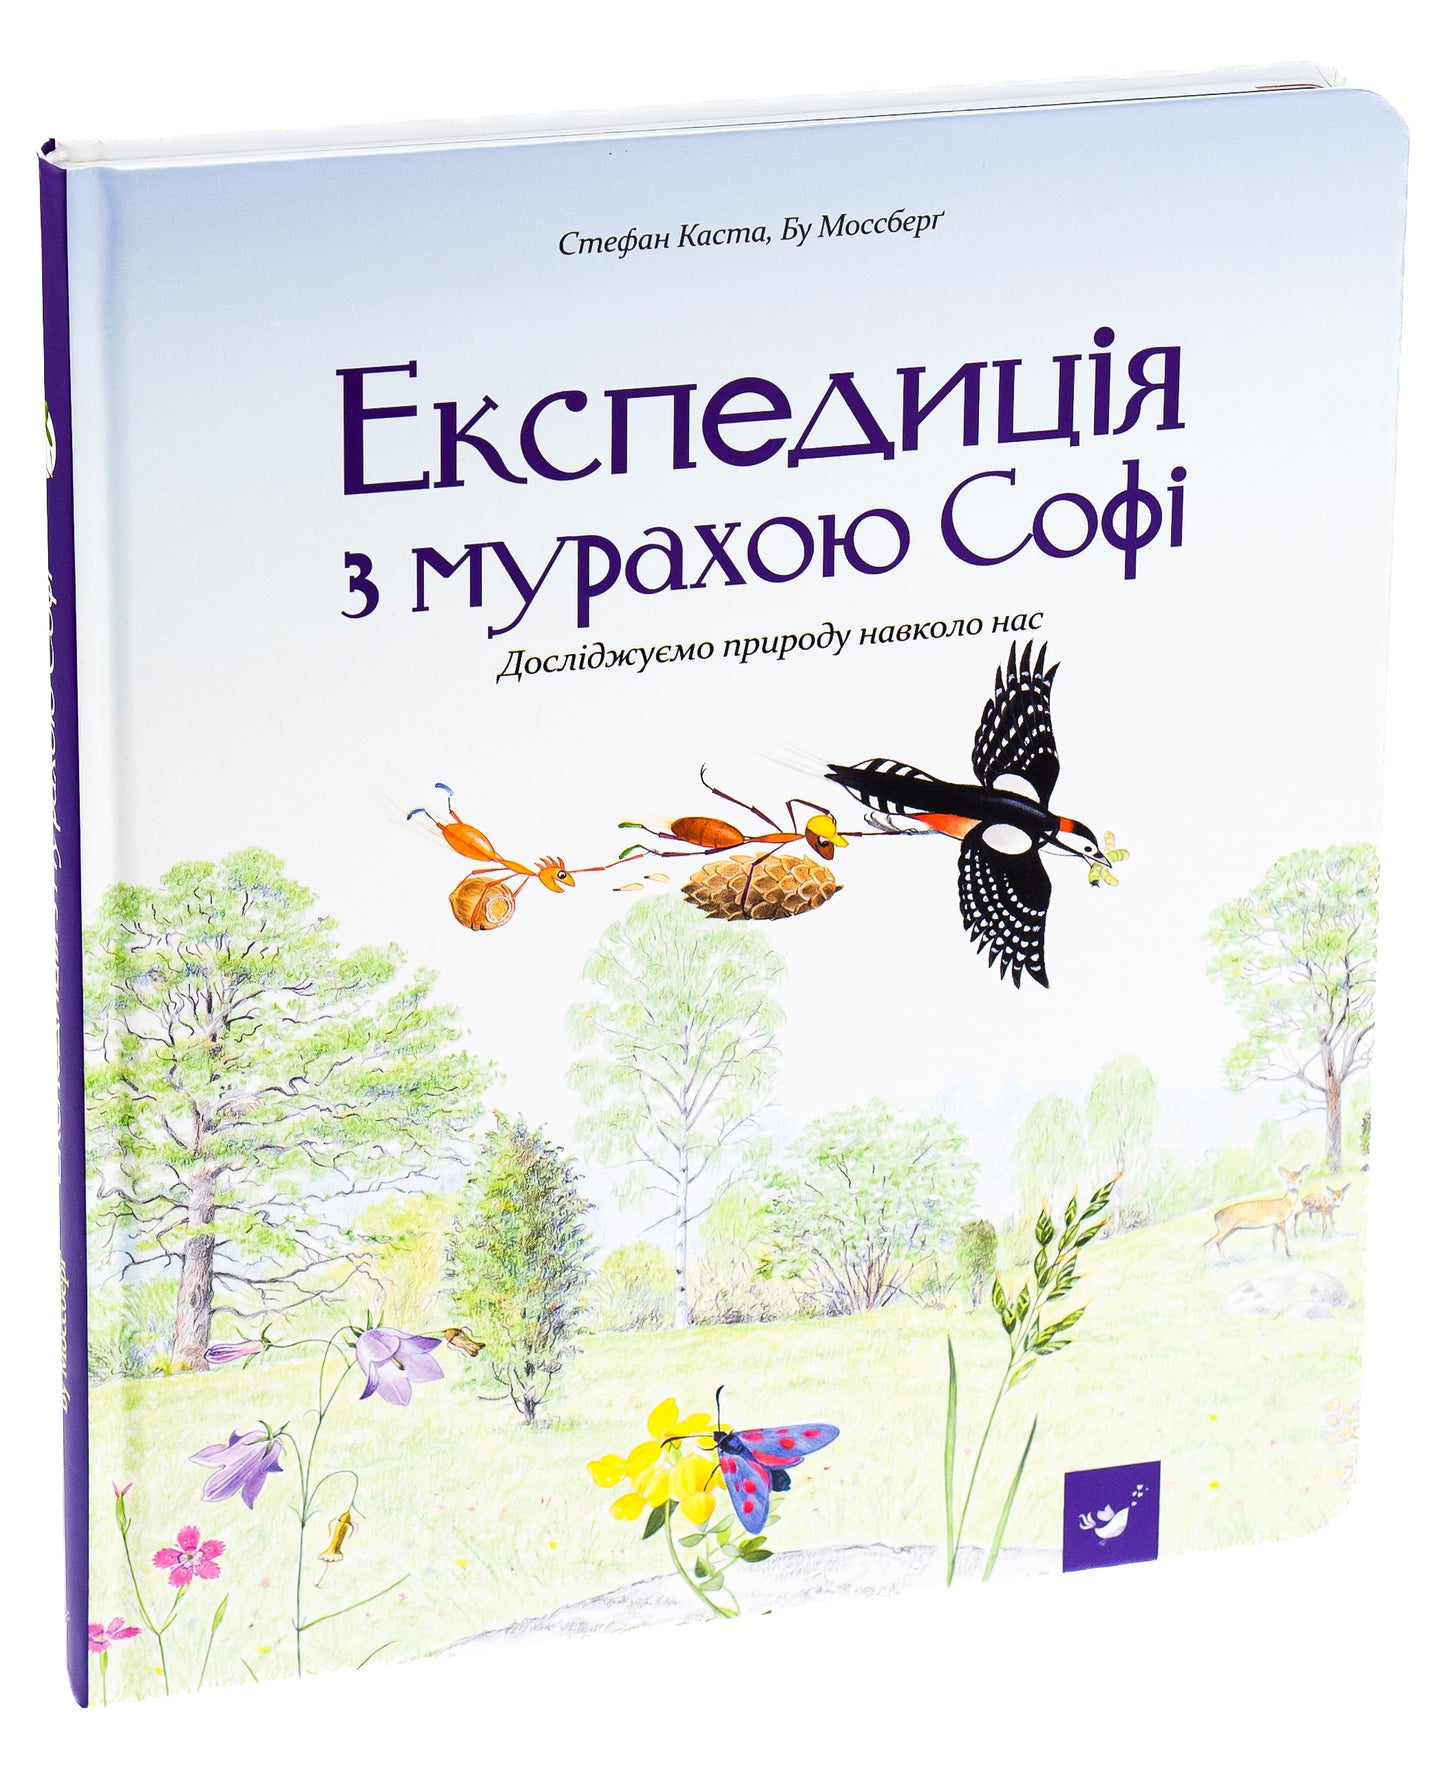 Expedition With Sophie The Ant / Експедиція з мурахою Софі Stefan Casta / Стефан Каста 9789669152572-3